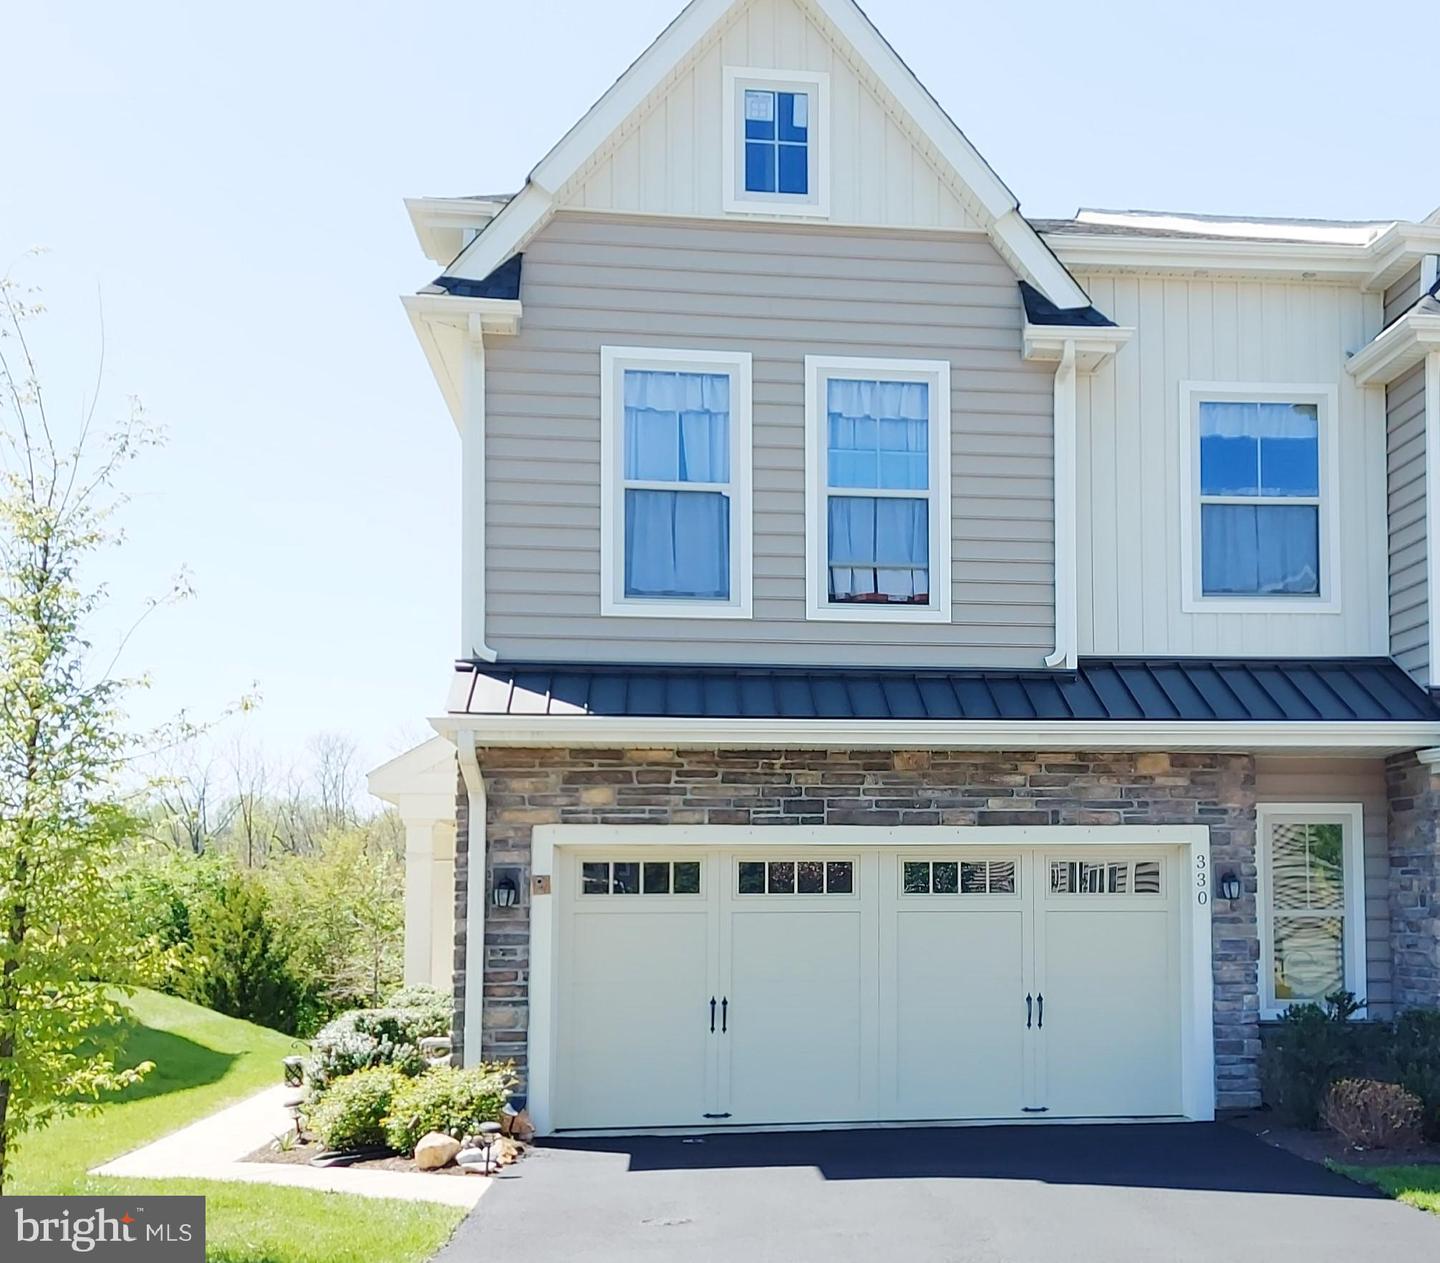 View Kennett Square, PA 19348 townhome